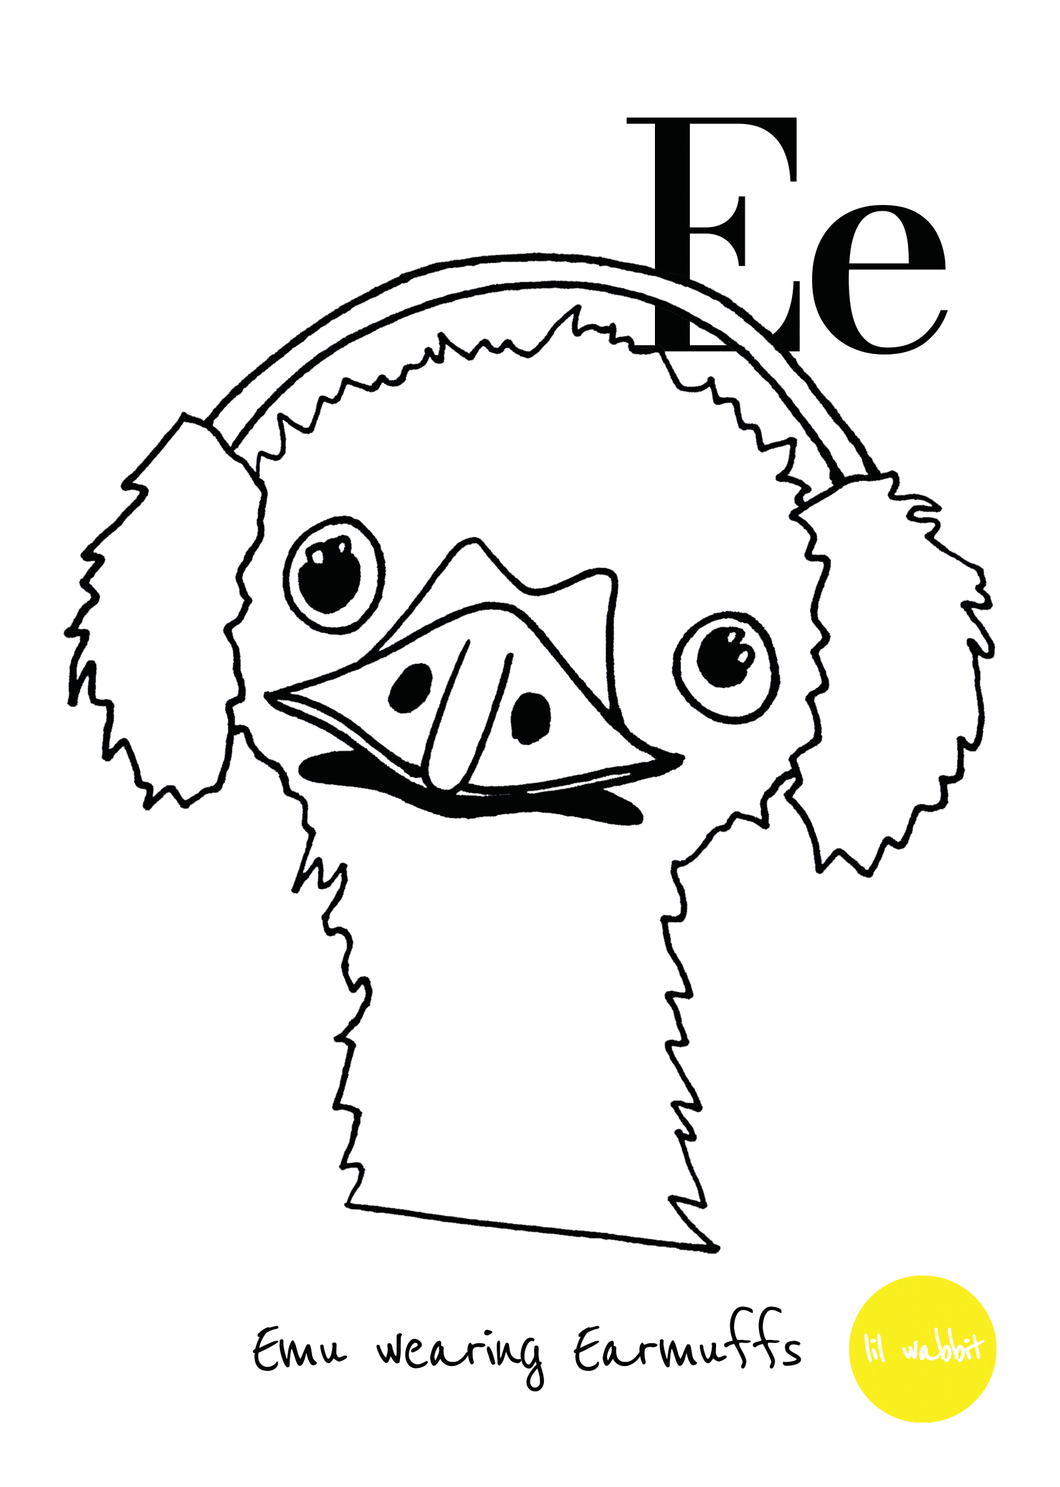 A black animal outline ready to colour in of an emu with earmuffs